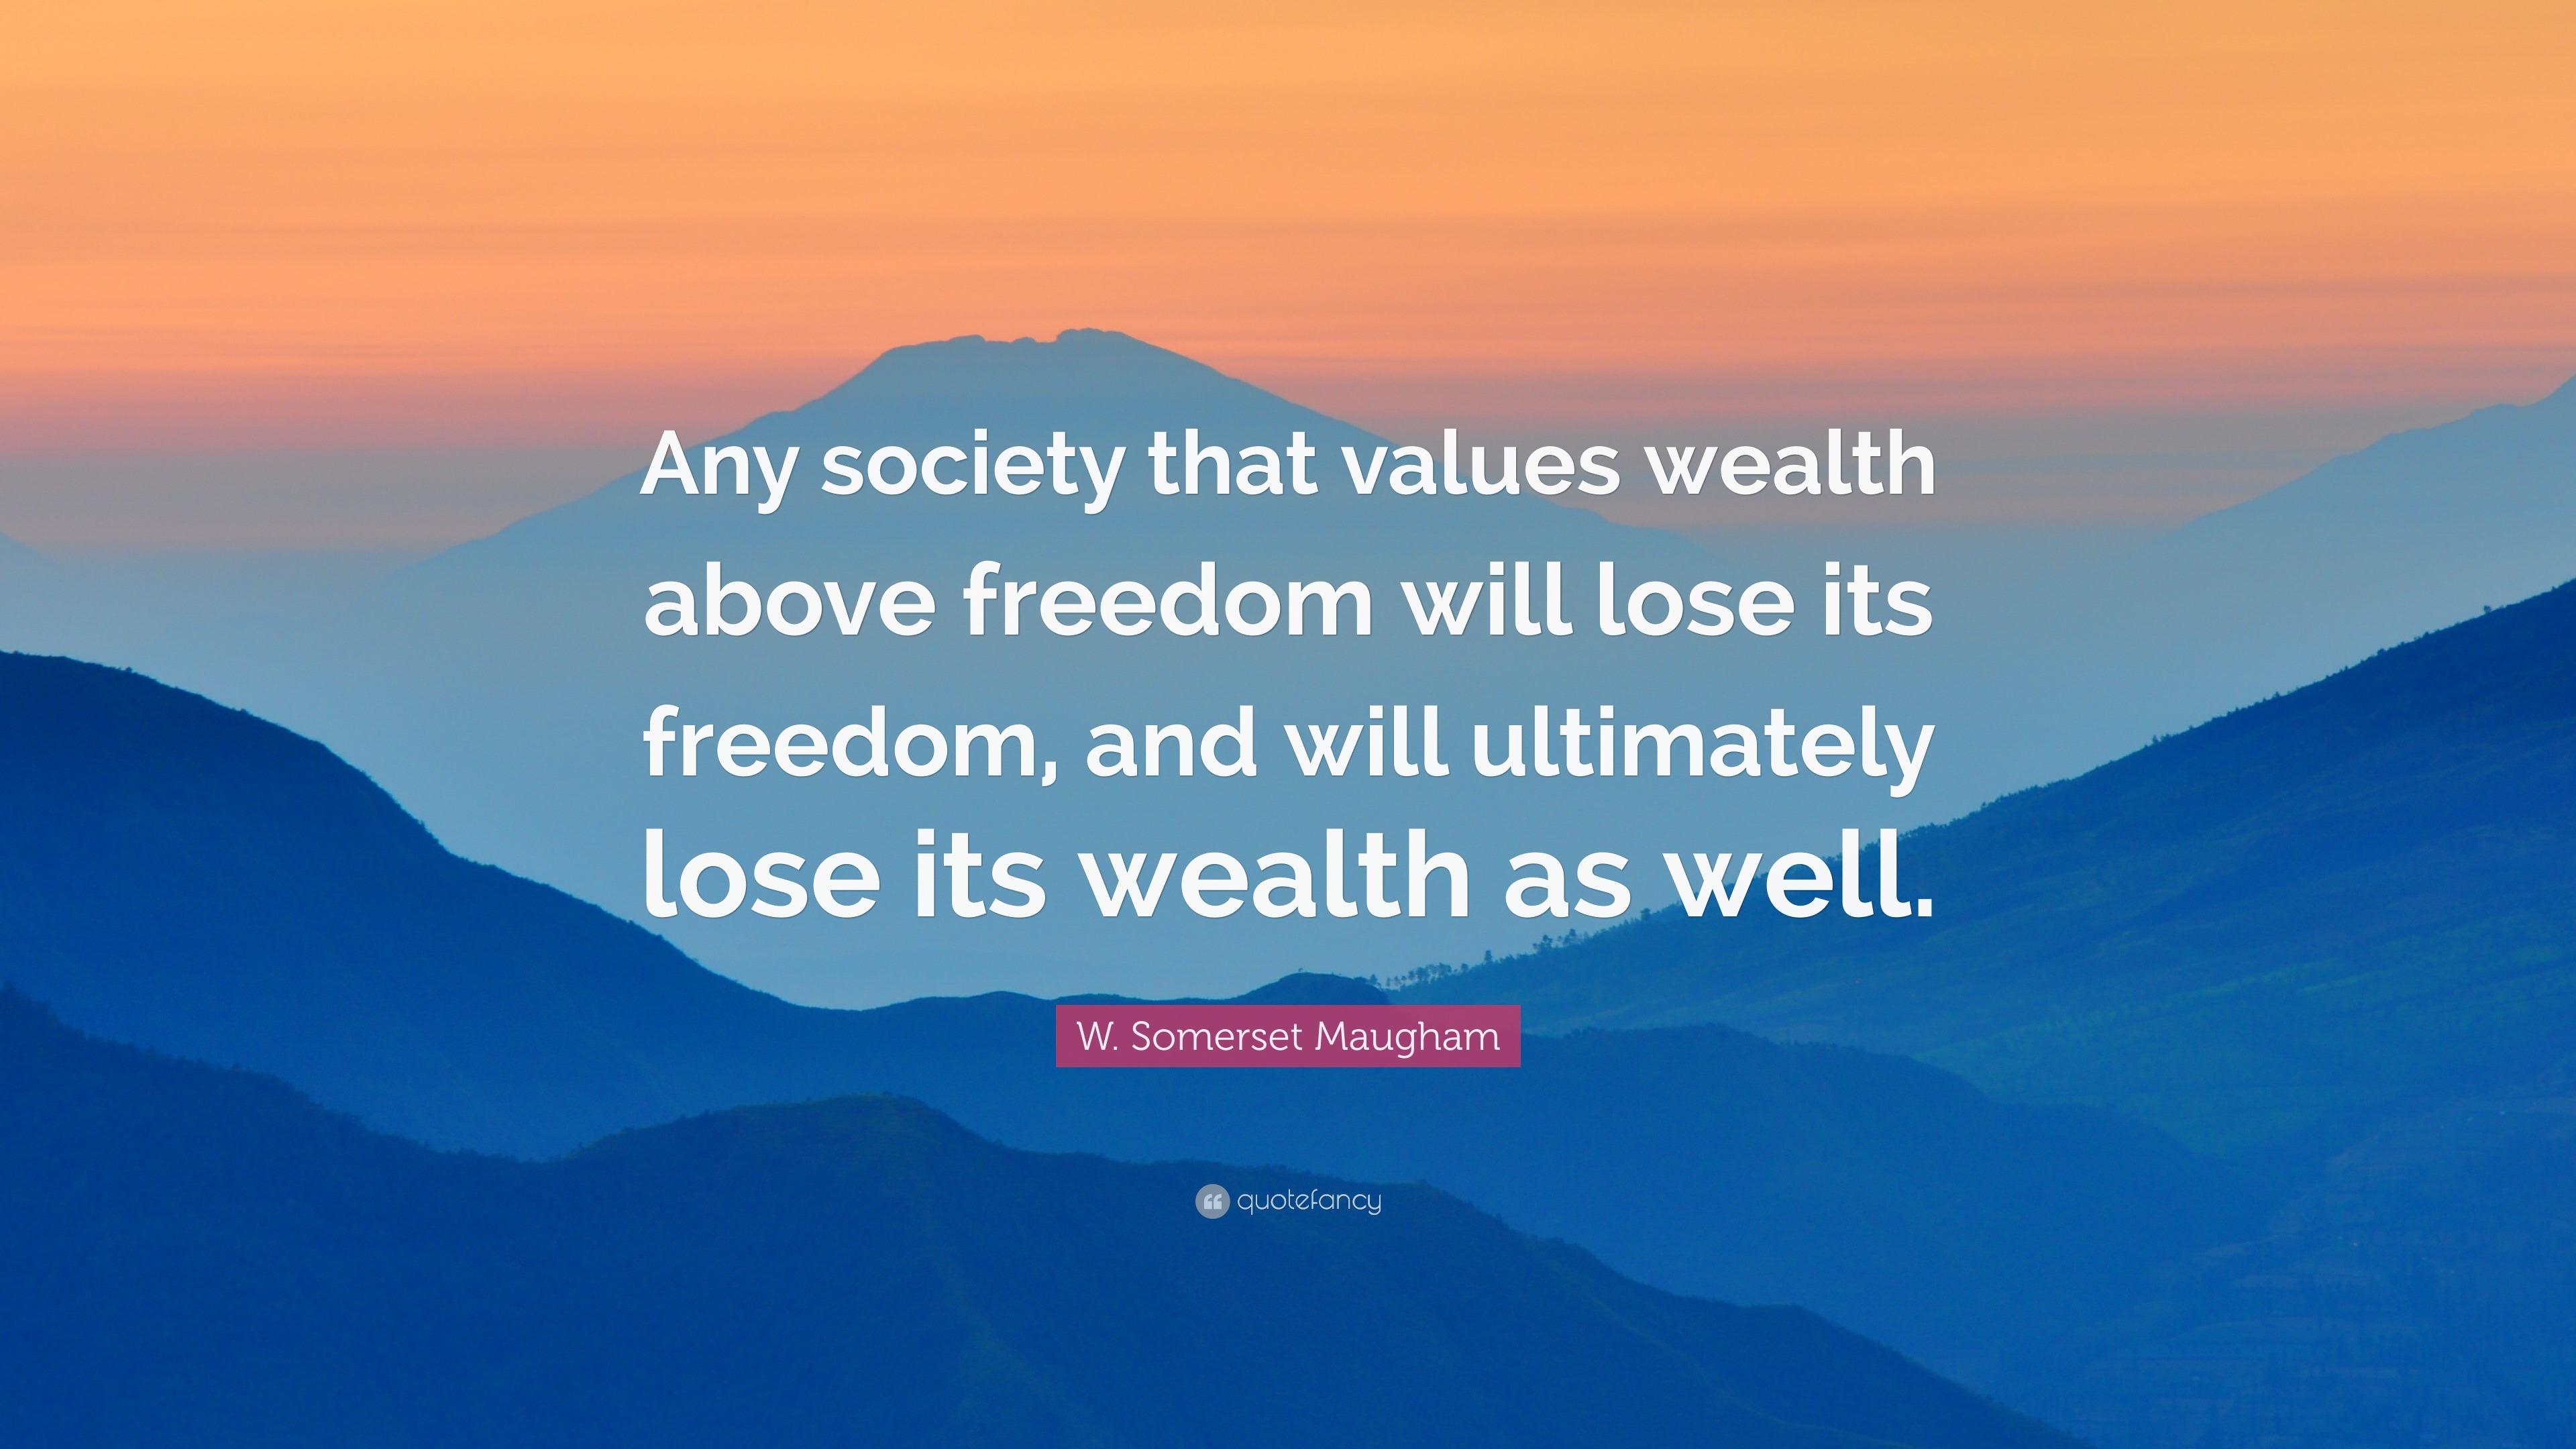 W. Somerset Maugham Quote: “Any society that values wealth above